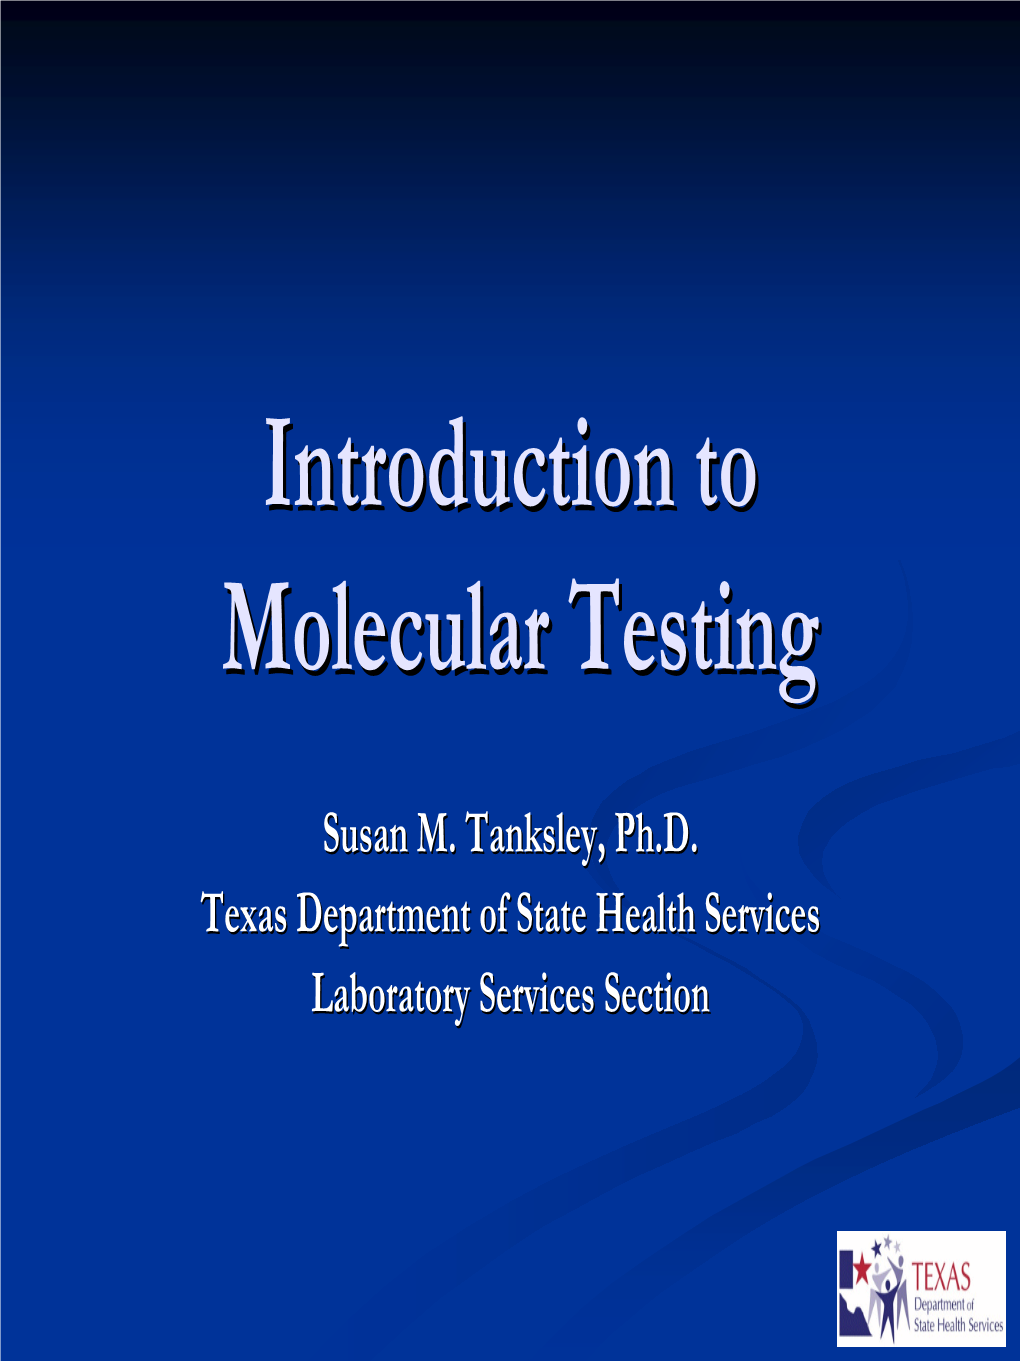 Introduction to Molecular Testing